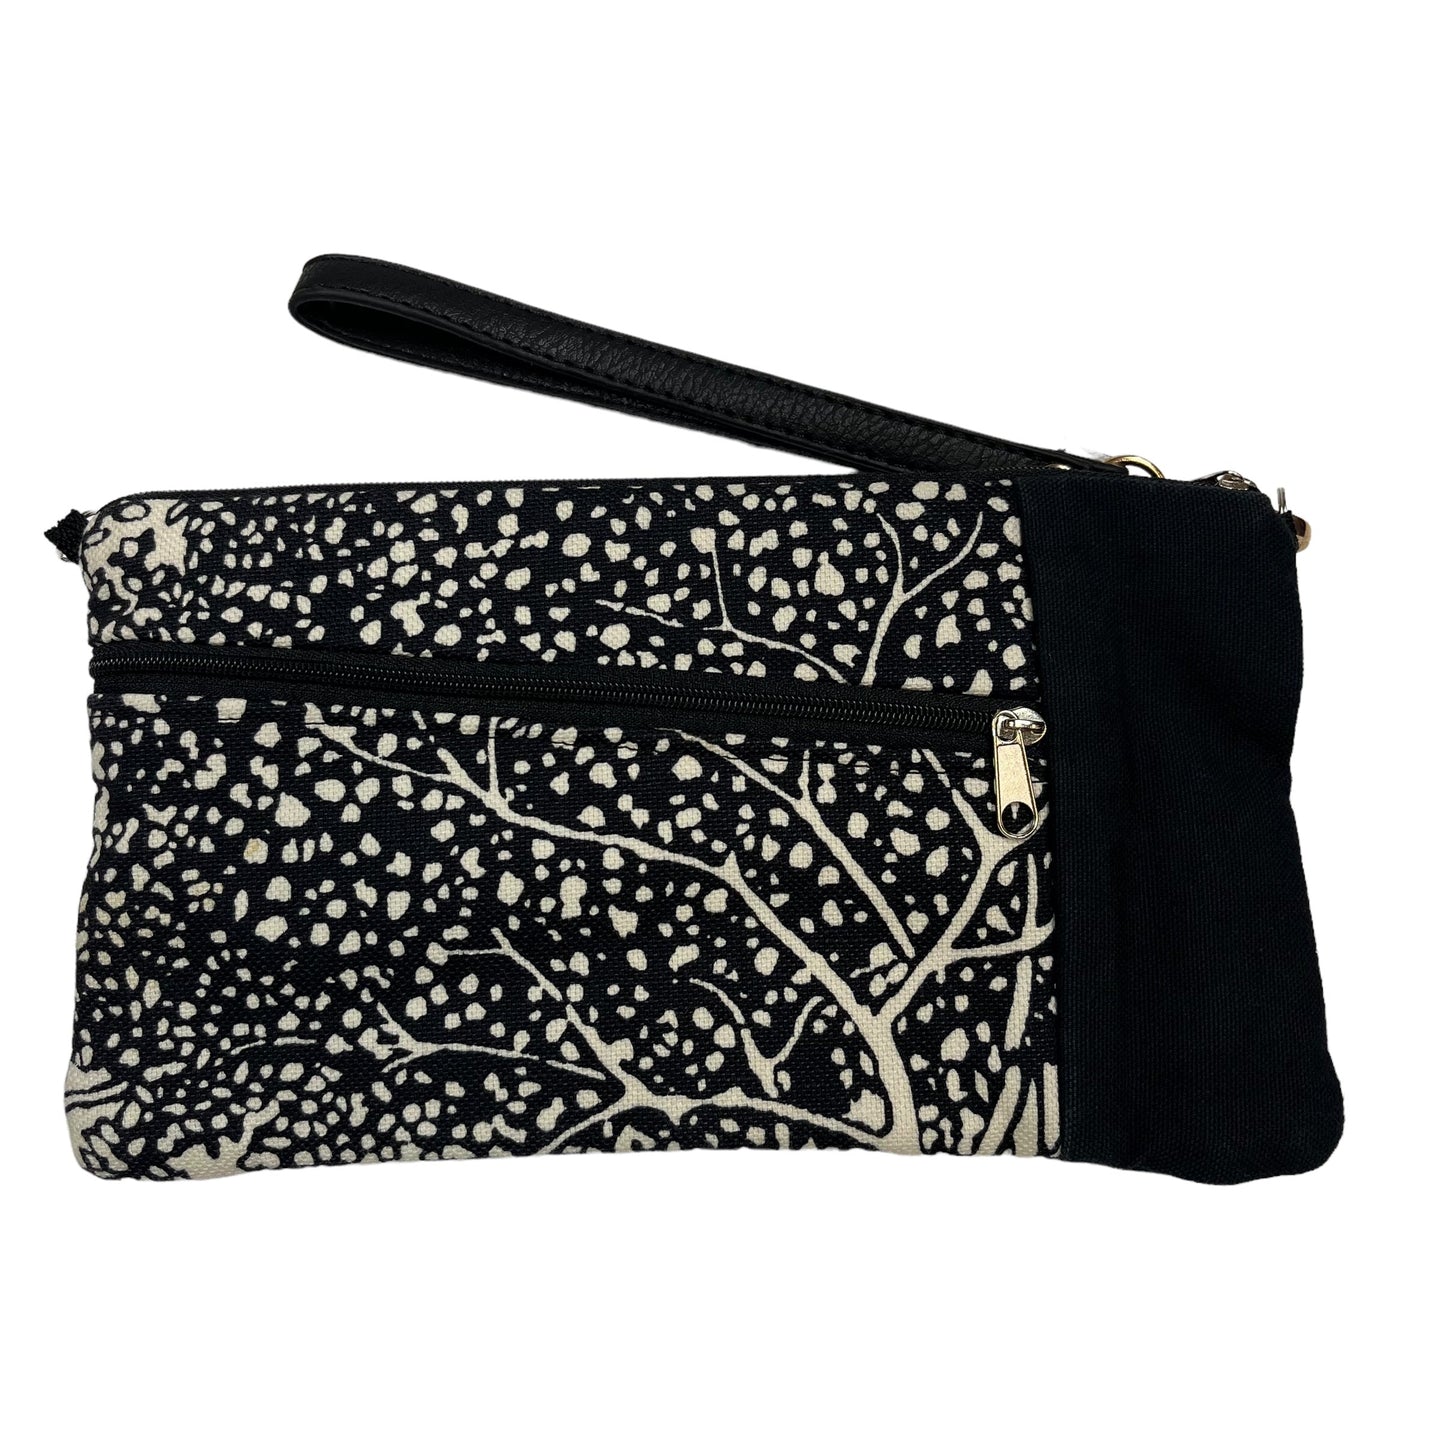 Wristlet By Sew n Style Size: Small